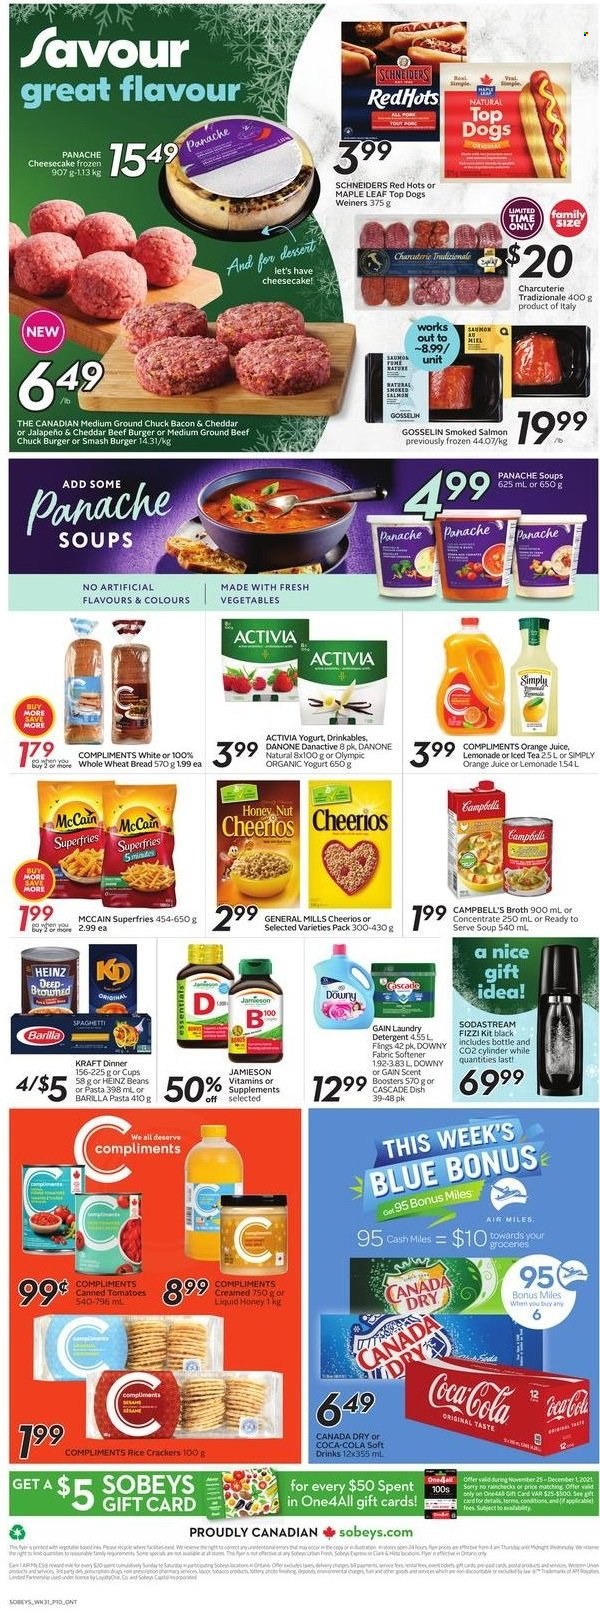 thumbnail - Sobeys Flyer - November 25, 2021 - December 01, 2021 - Sales products - wheat bread, cheesecake, beans, Campbell's, spaghetti, soup, hamburger, Barilla, beef burger, Kraft®, bacon, cheese, yoghurt, organic yoghurt, Activia, McCain, potato fries, crackers, rice crackers, broth, Heinz, Cheerios, Canada Dry, Coca-Cola, lemonade, orange juice, juice, ice tea, soft drink, gin, ground chuck, Gain, fabric softener, laundry detergent, Cascade, scent booster, Danone, detergent. Page 2.